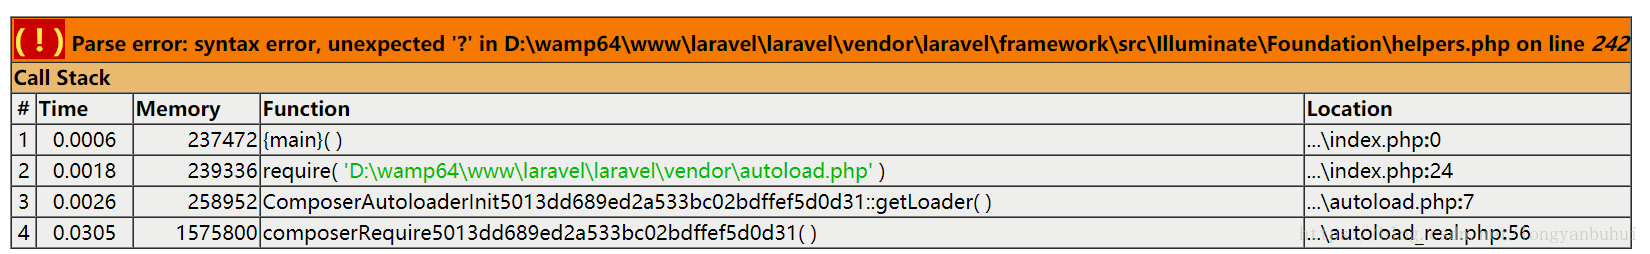 Request parsing error. Syntax Error, unexpected end of file in. Syntax Error: unexpected Template String. Warning: undefined array Key "fotodo" in c:\OPENSERVER\domains\localhost\груминг\заявки.php on line 34. Fill variable in parent Constructor and use in child php.